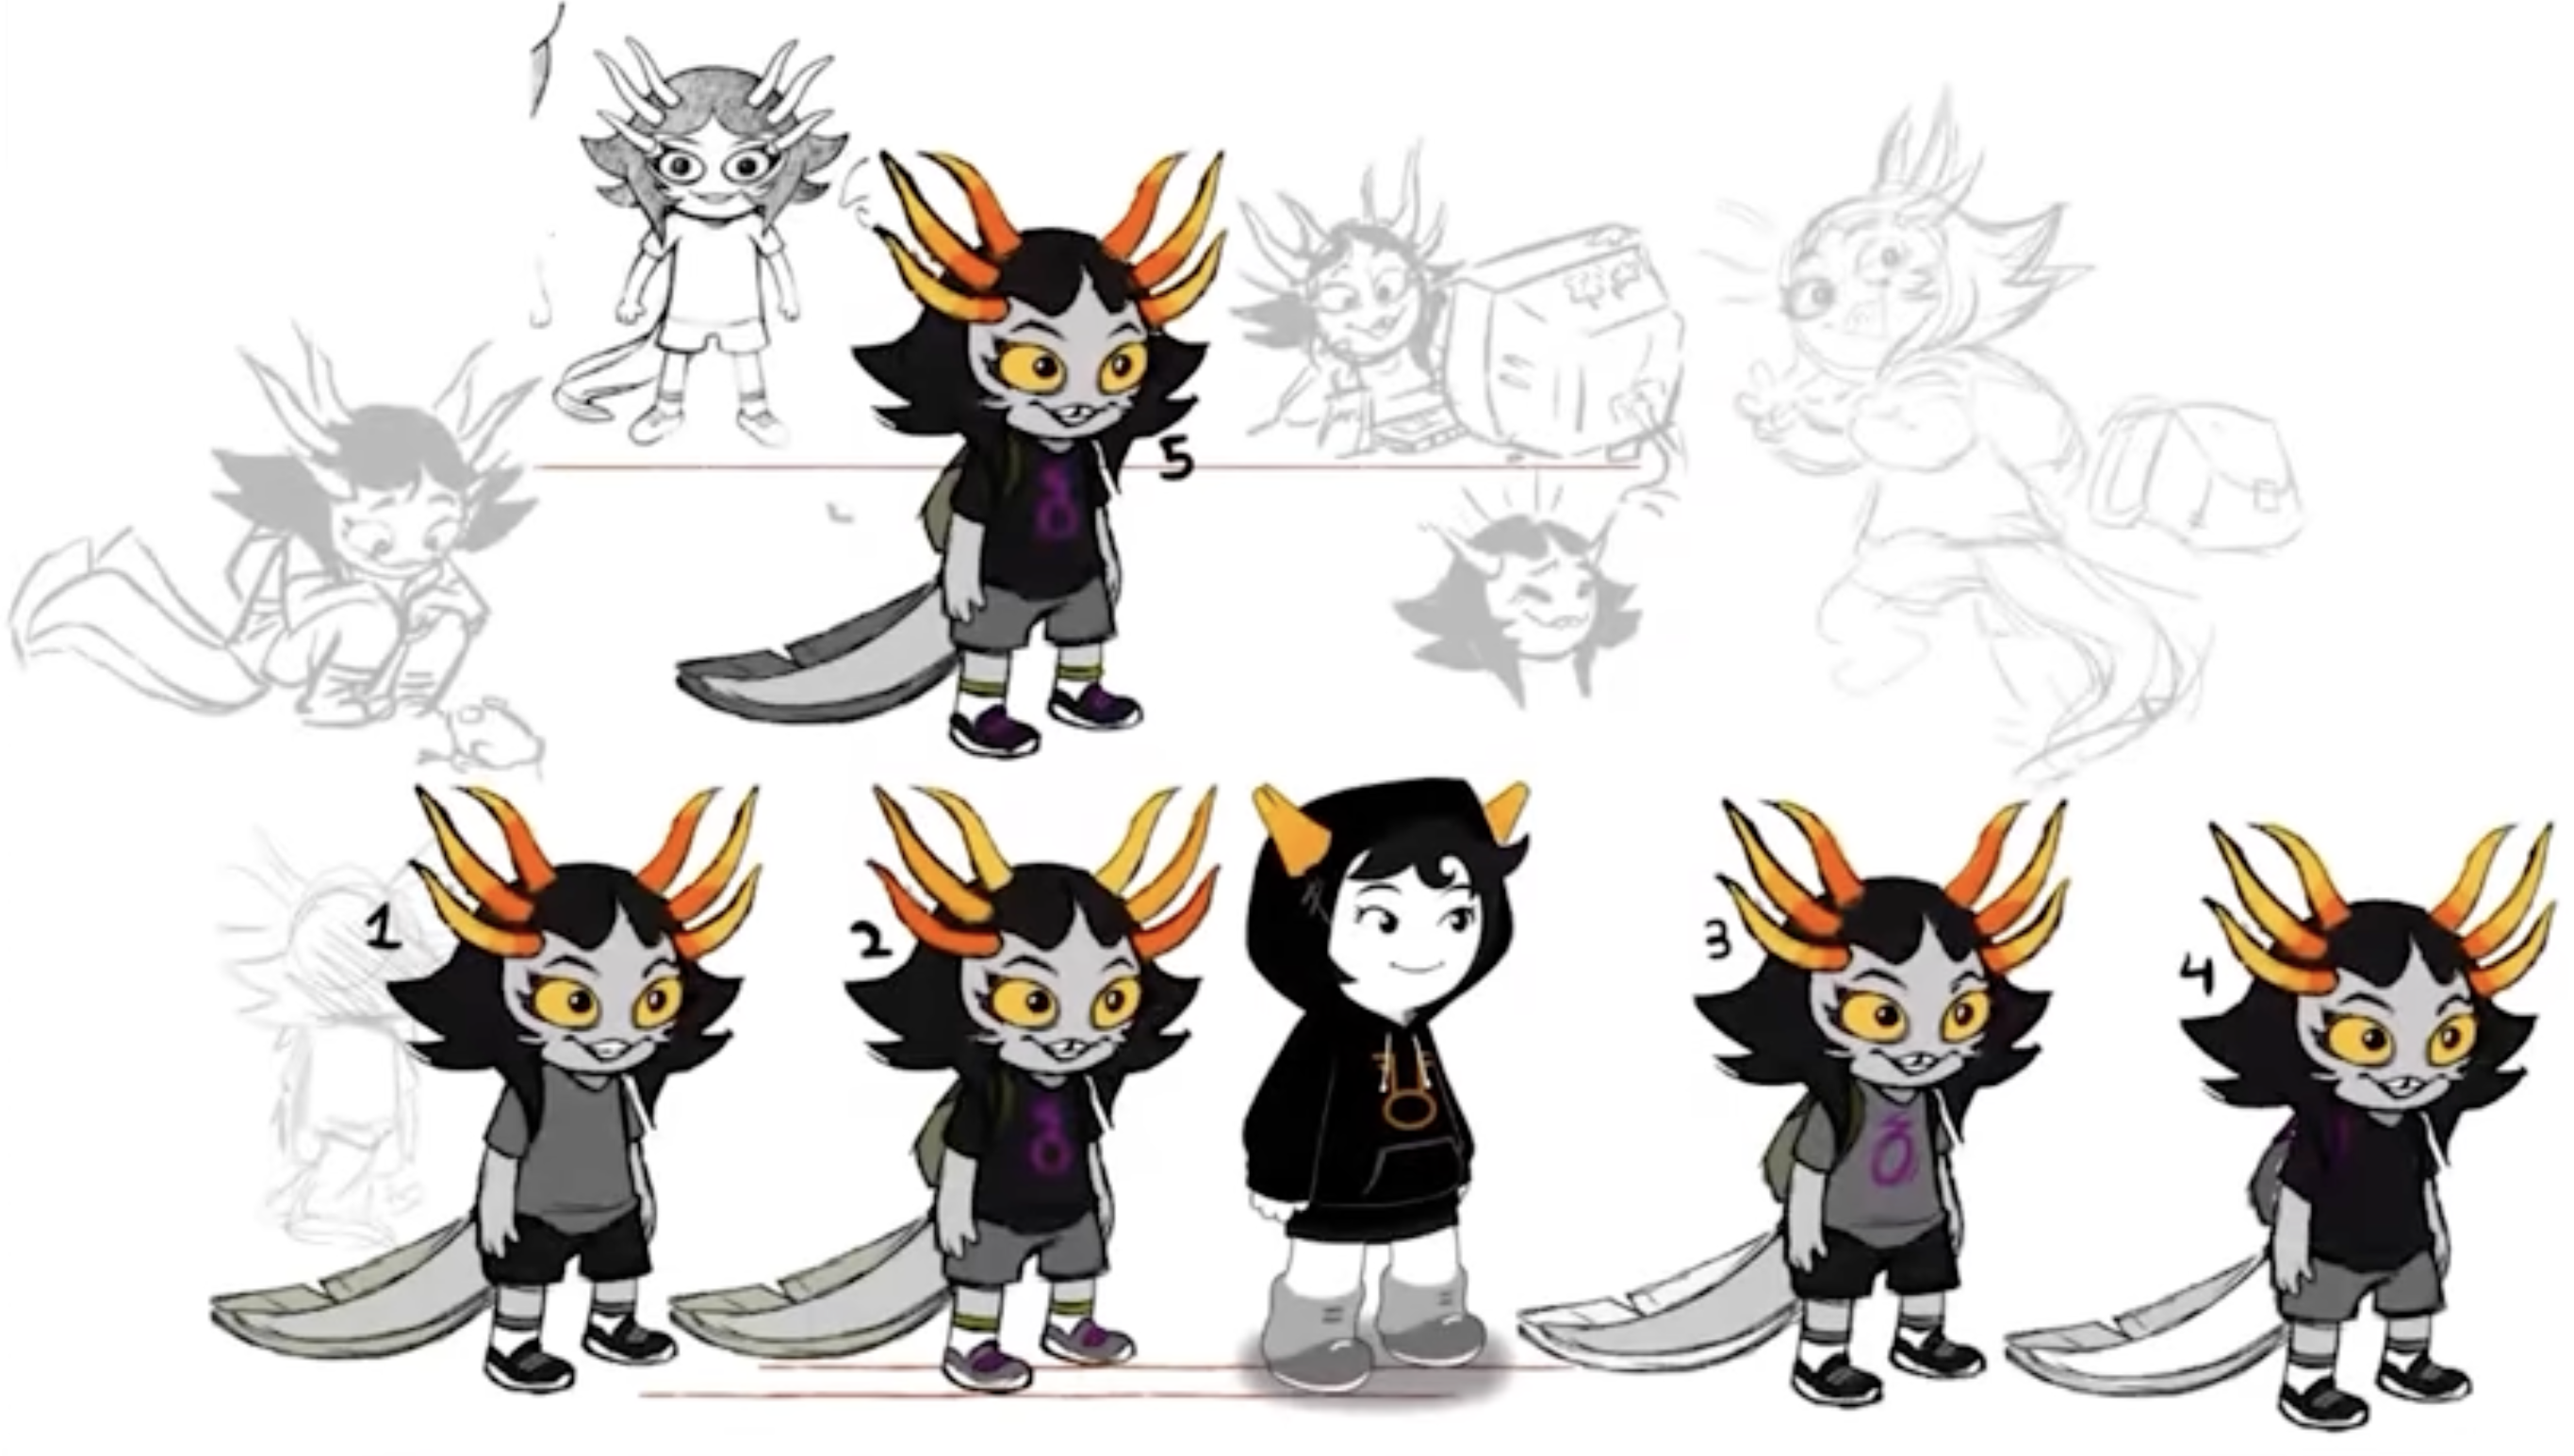 A concept art sheet of Fiamet. The final design is at the top labeled 5. Around it are sketches: A vague version of her design drawn by Hussie, Fiamet squatting and looking at a frog, Fiamet looking happily at a boxy computer, Fiamet turning around to show her backpack. Below that is a row of alternate designs. The first one has a gray t-shirt, black shorts, no backpack, and all the colorful parts of her design are gray. The second one is the same as the final except with gray shoes and gradient horns. Then there is a Joey sprite for scale. The third one has a gray shirt with a weirdly drawn Aquamino sign on it and black shorts. The fourth one has a pure black t-shirt and the backpack has violet straps.